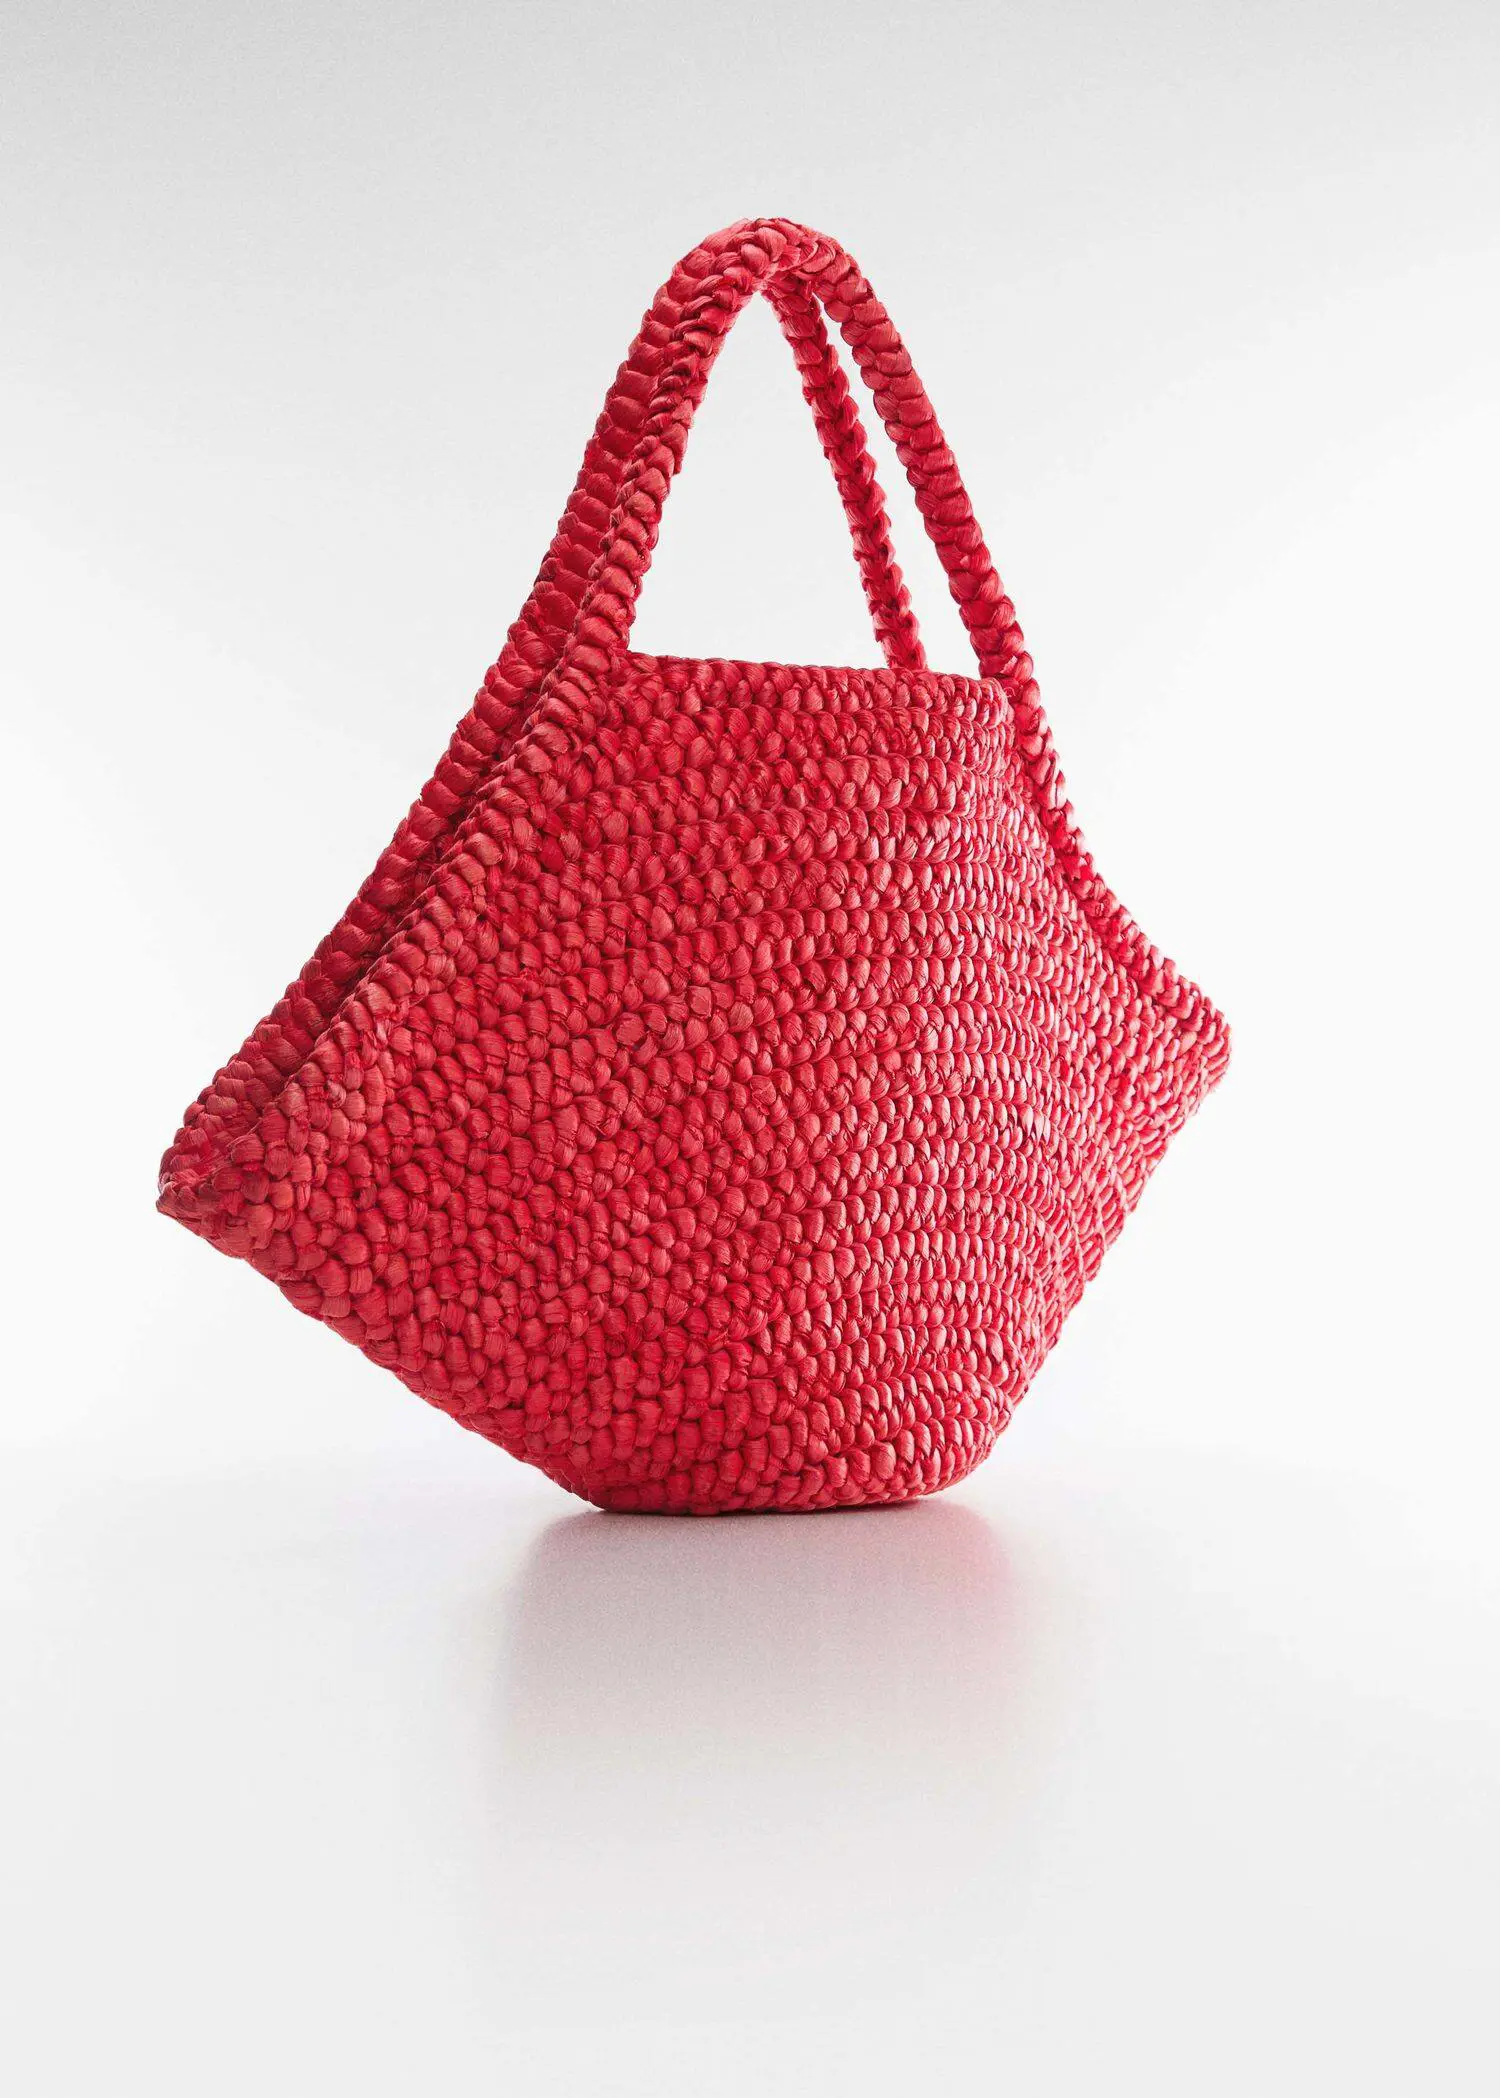 Mango Natural fibre maxi tote bag. a close up of a red bag on a white surface 